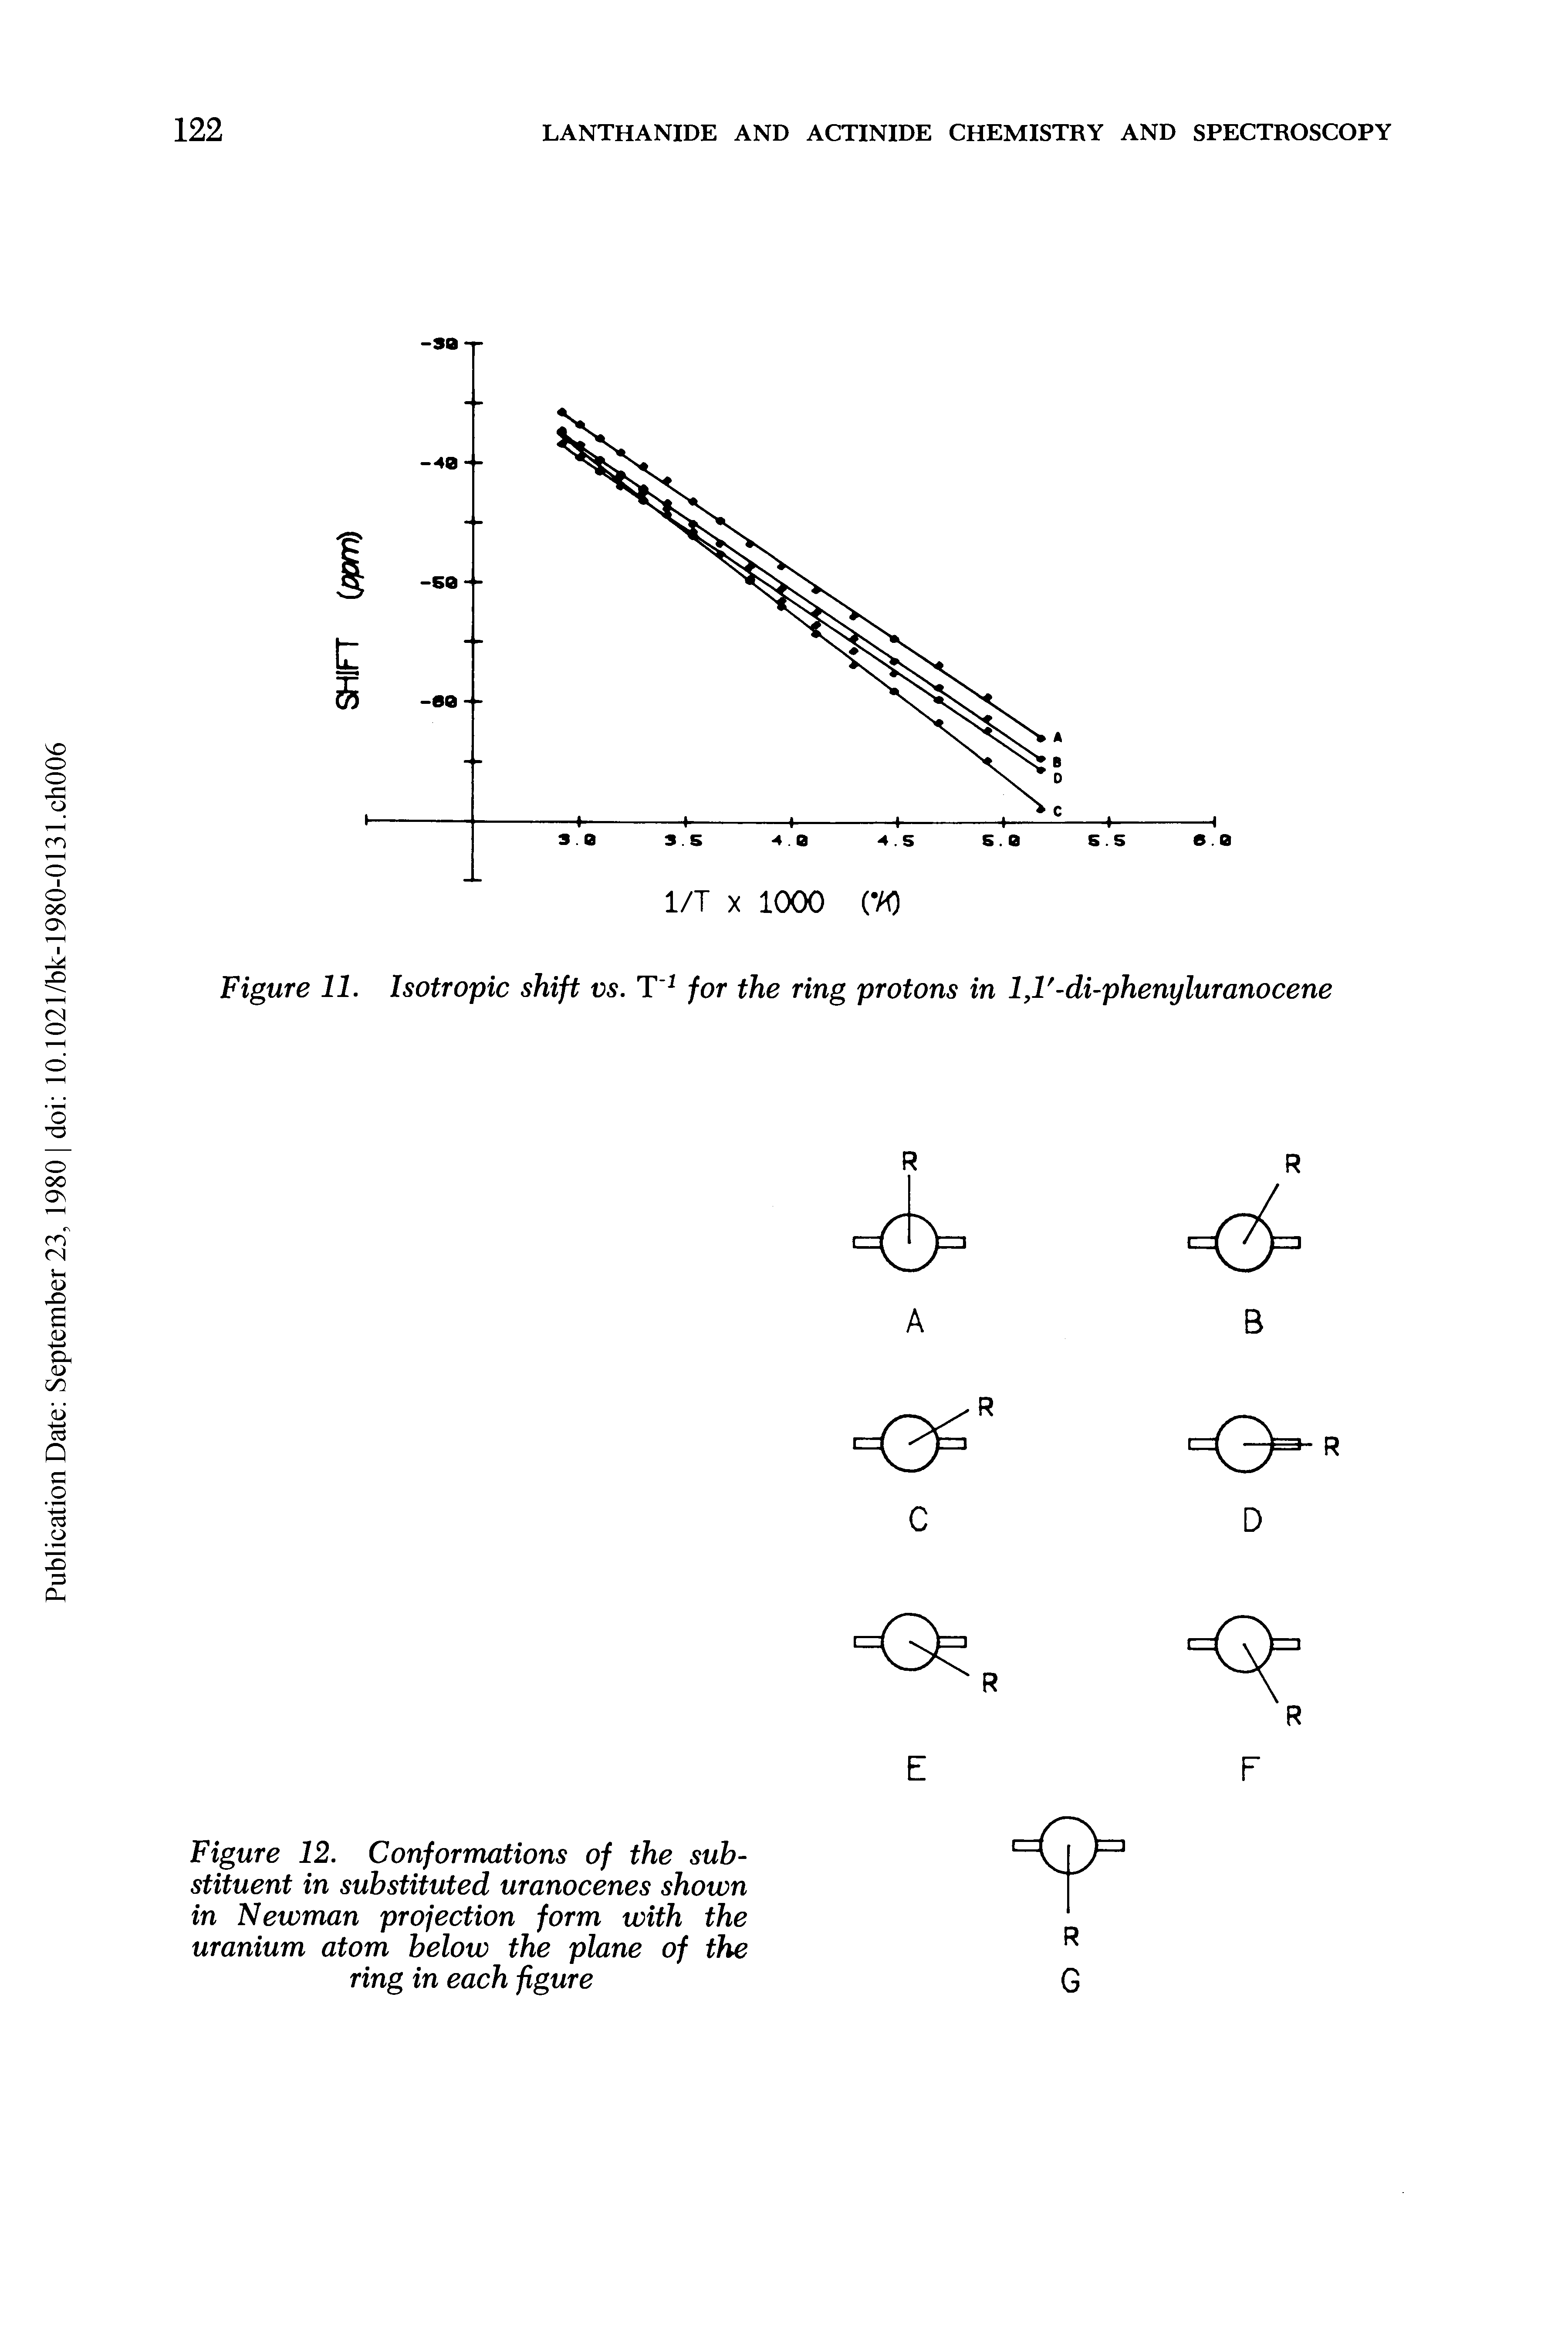 Figure 12. Conformations of the substituent in substituted uranocenes shown in Newman projection form with the uranium atom below the plane of the ring in each figure...